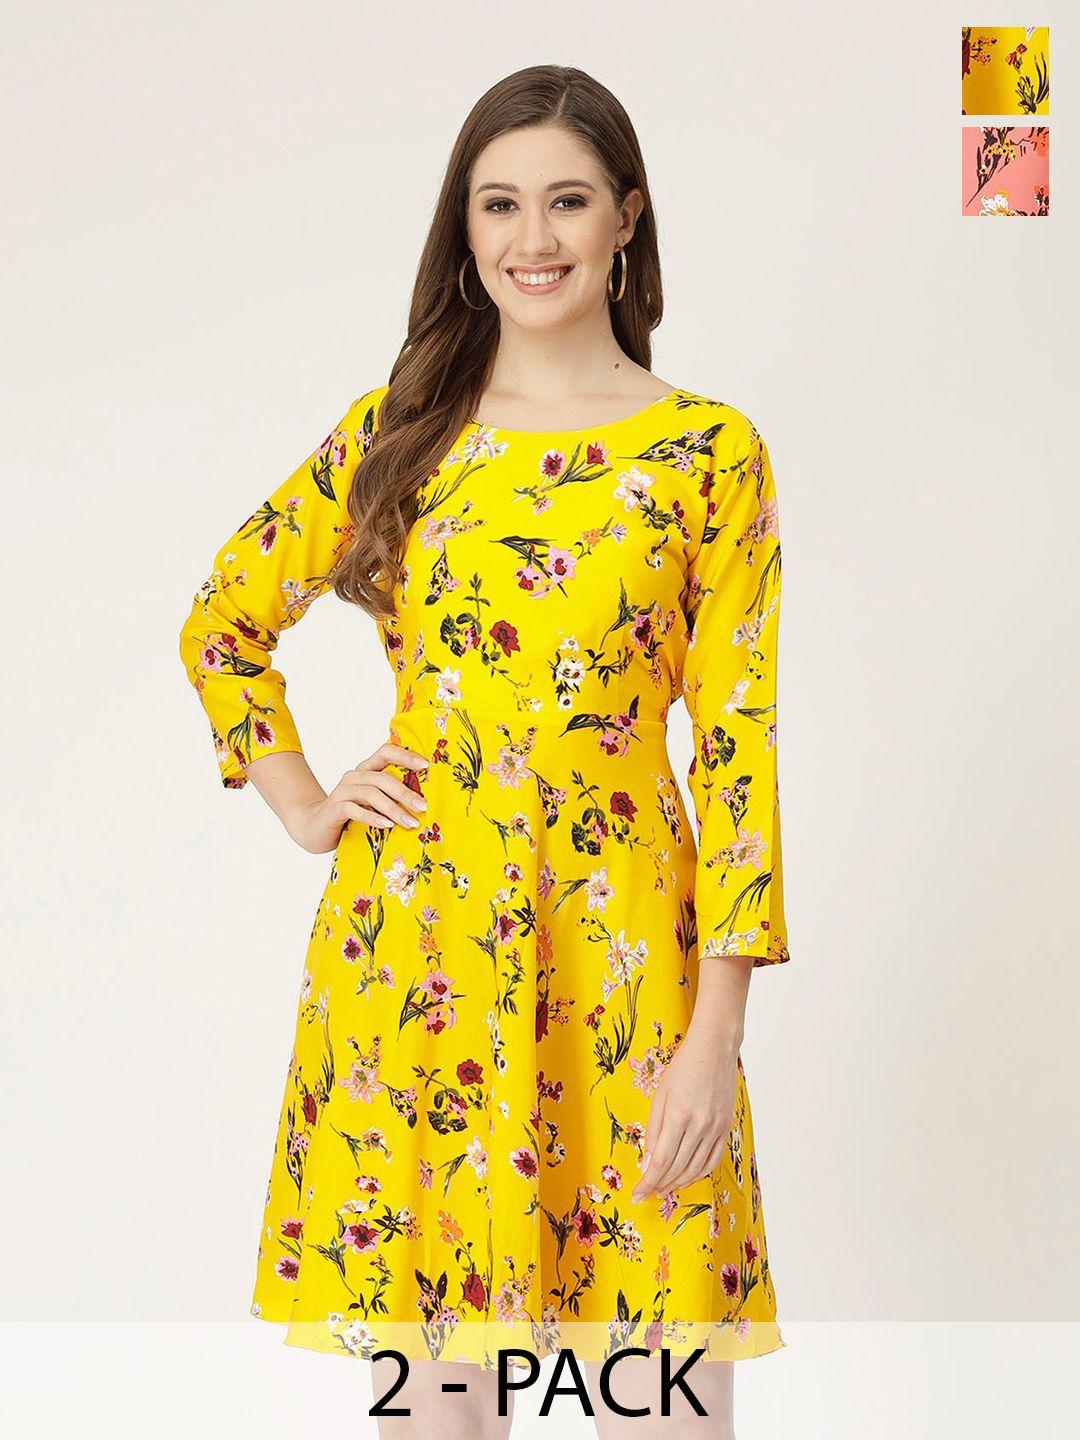 miss-ayse-pack-of-2-floral-print-crepe-fit-&-flare-dress